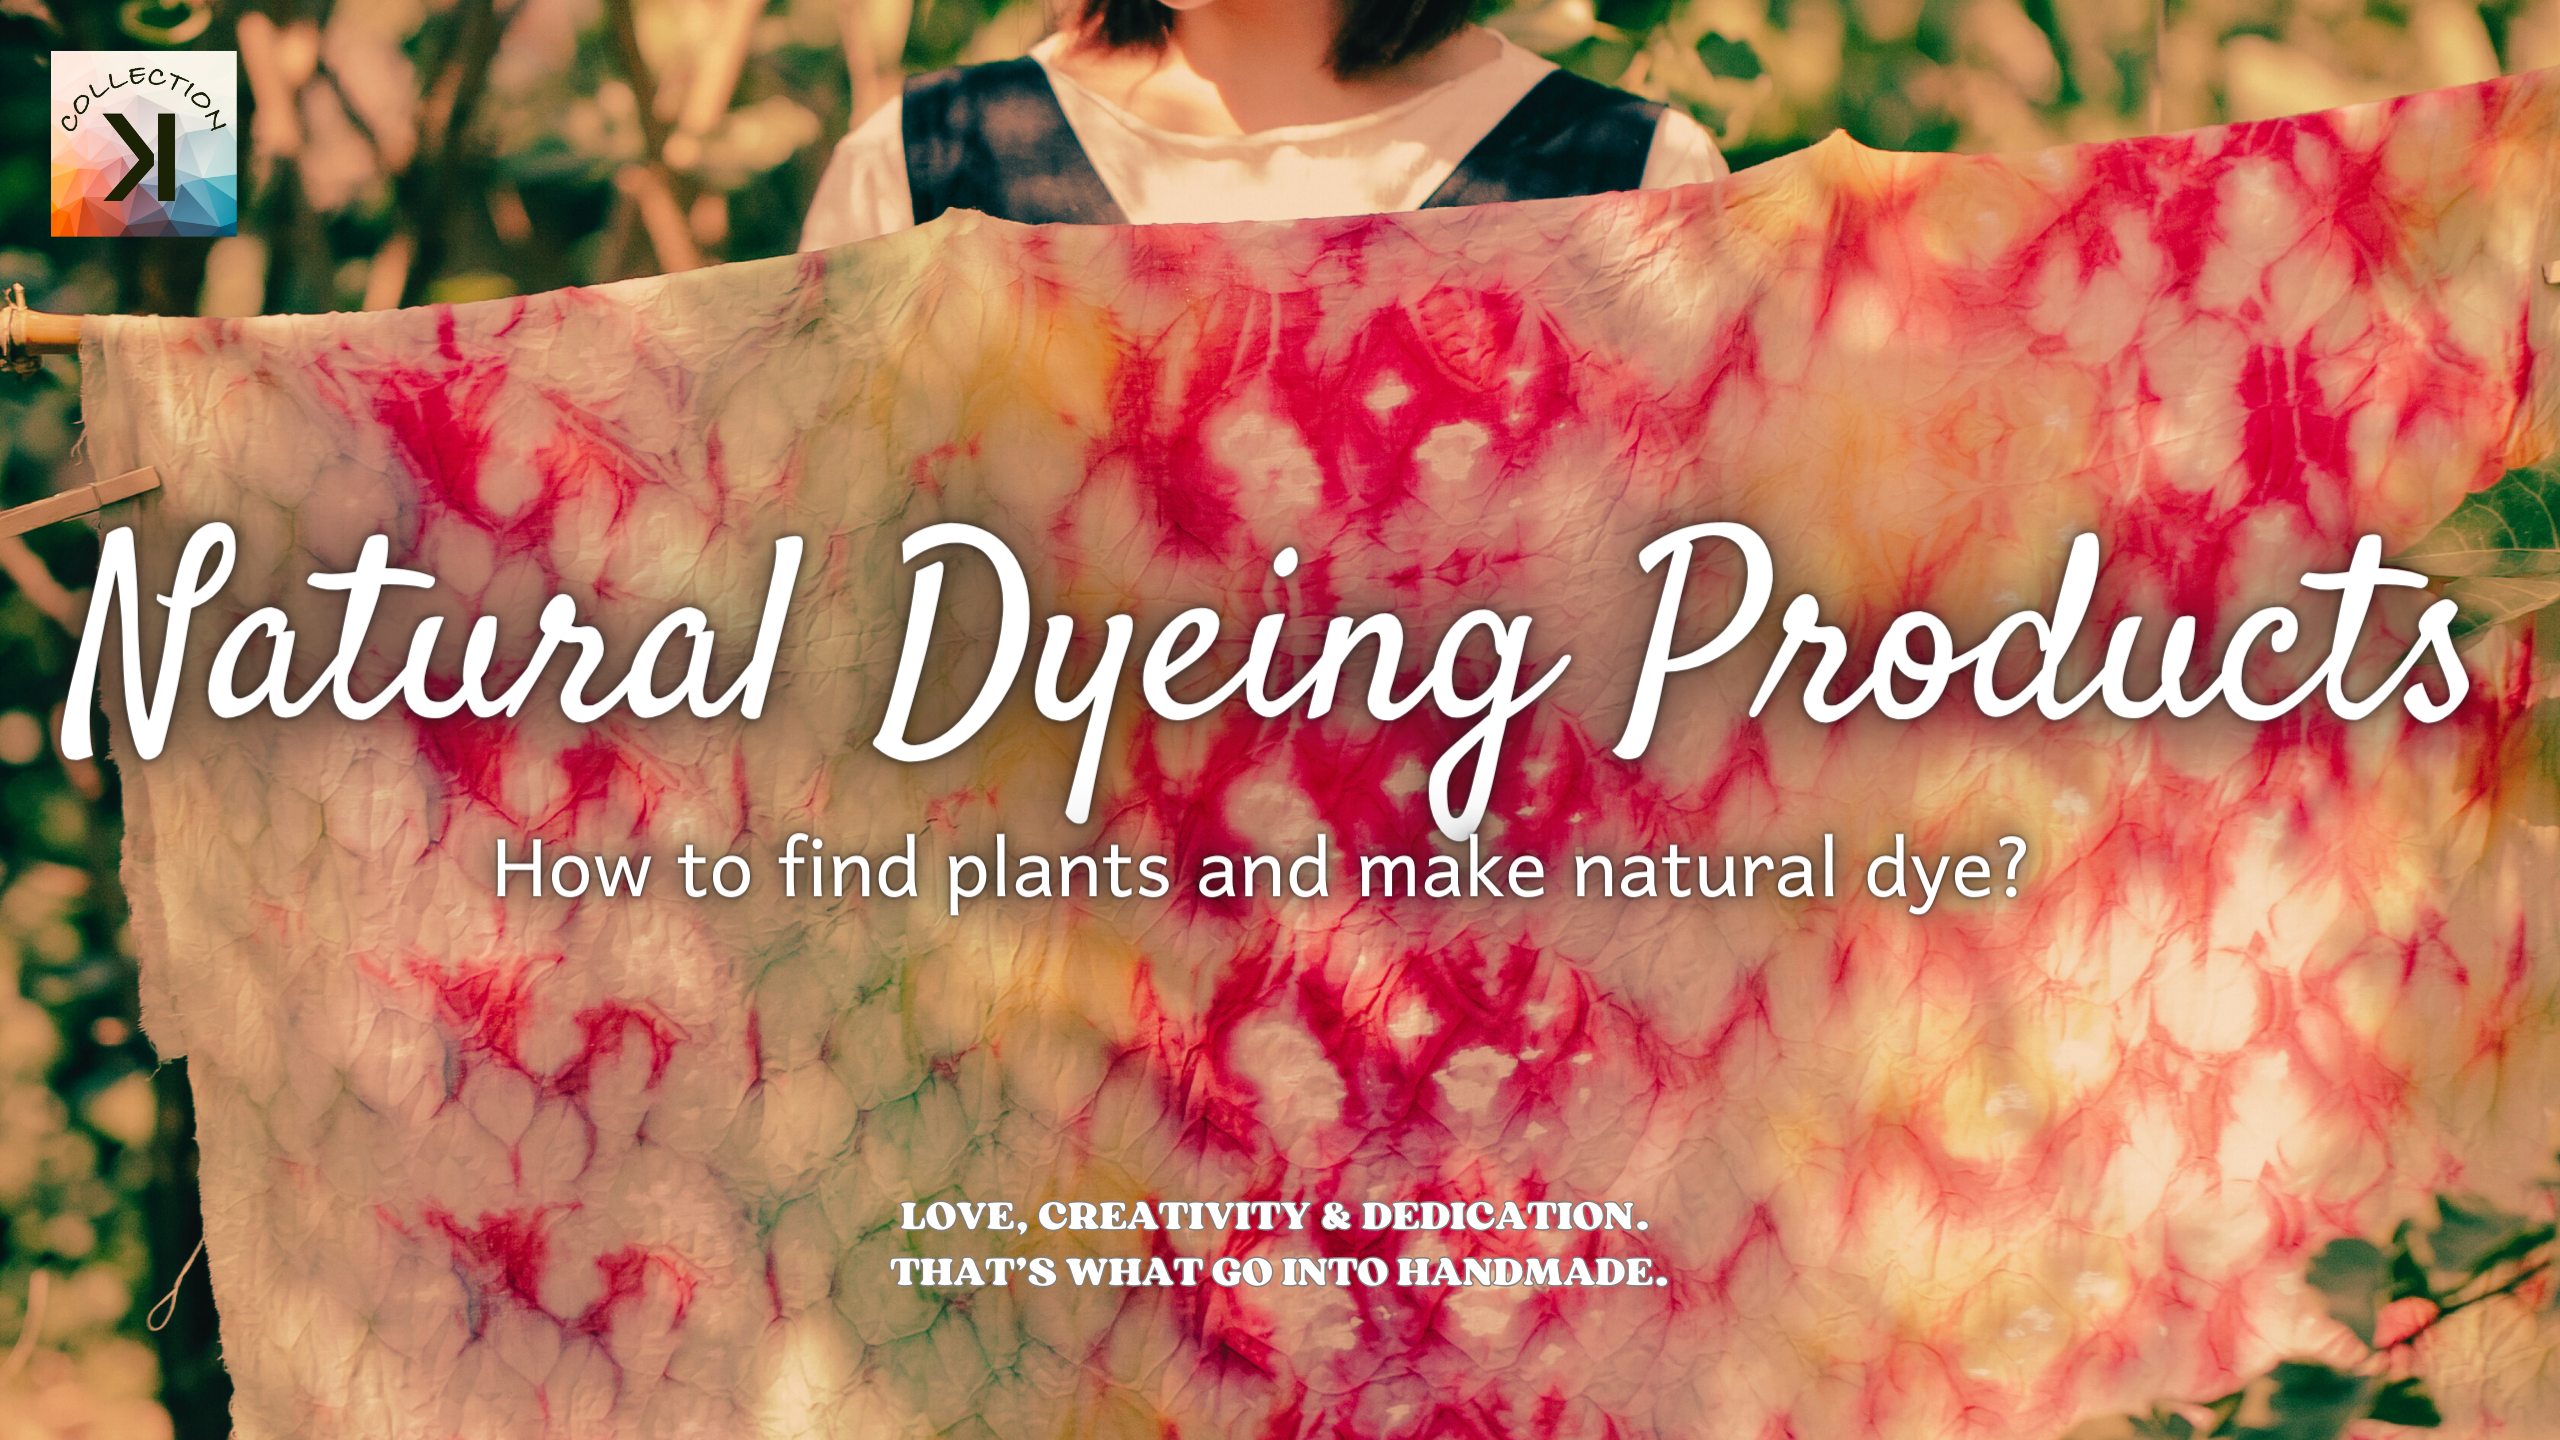 How Natural Dye?